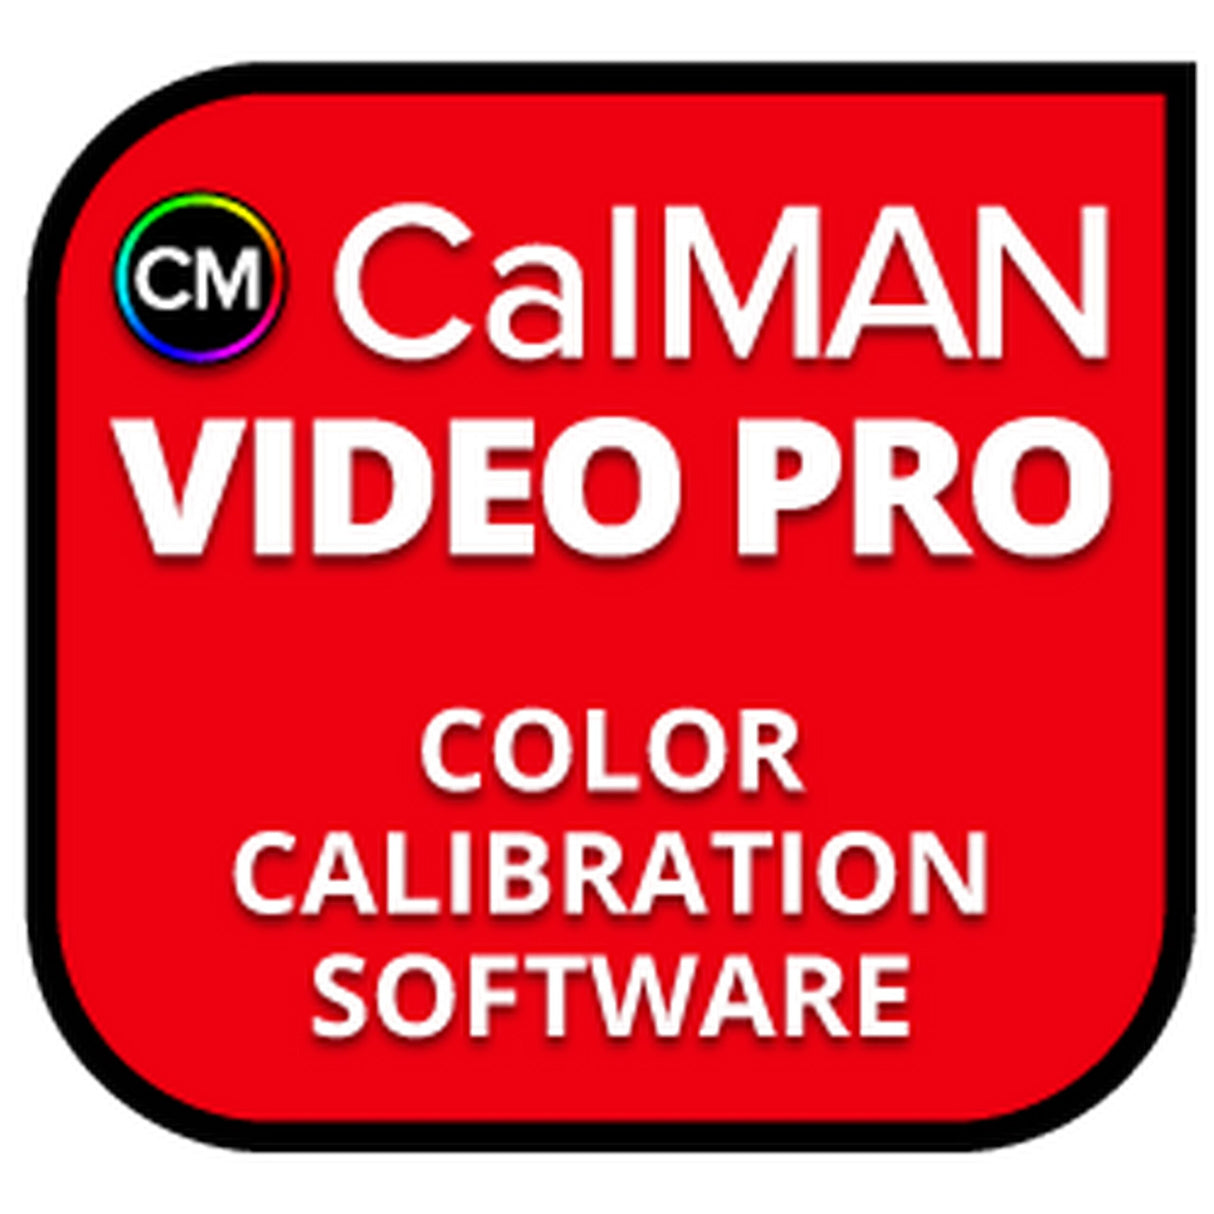 SpectraCal CalMAN Video Pro Color Calibration Software, Download Only